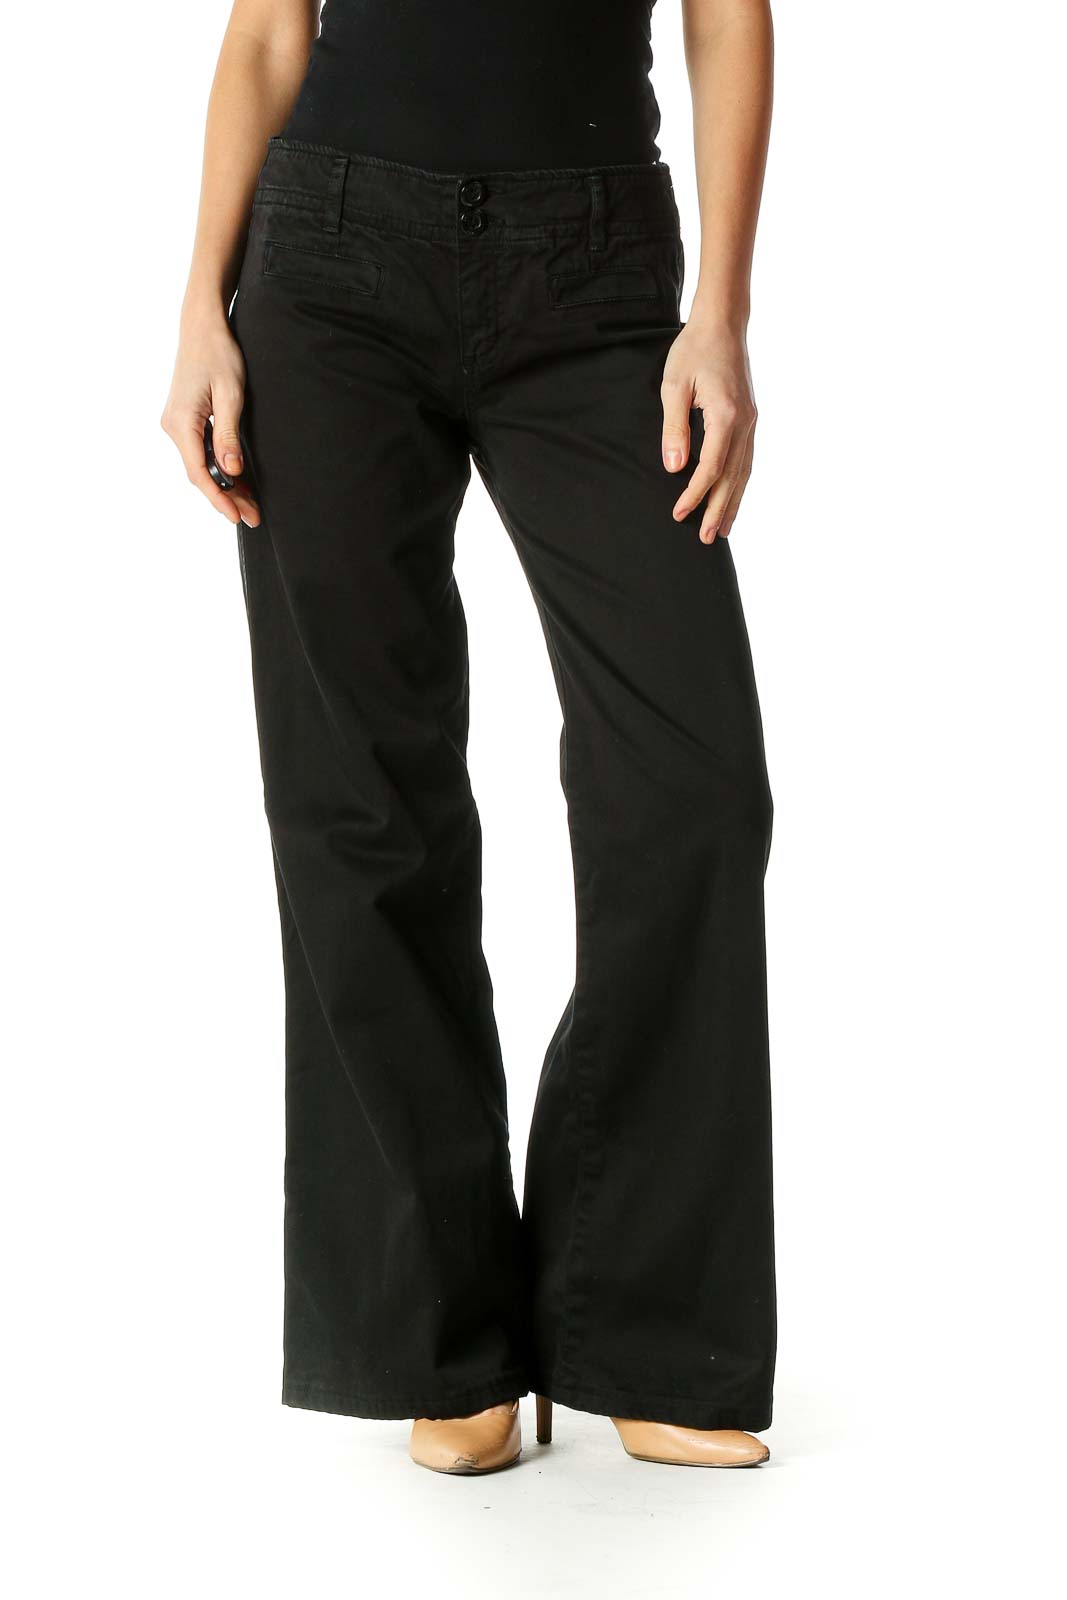 Black Solid Retro Trousers Front